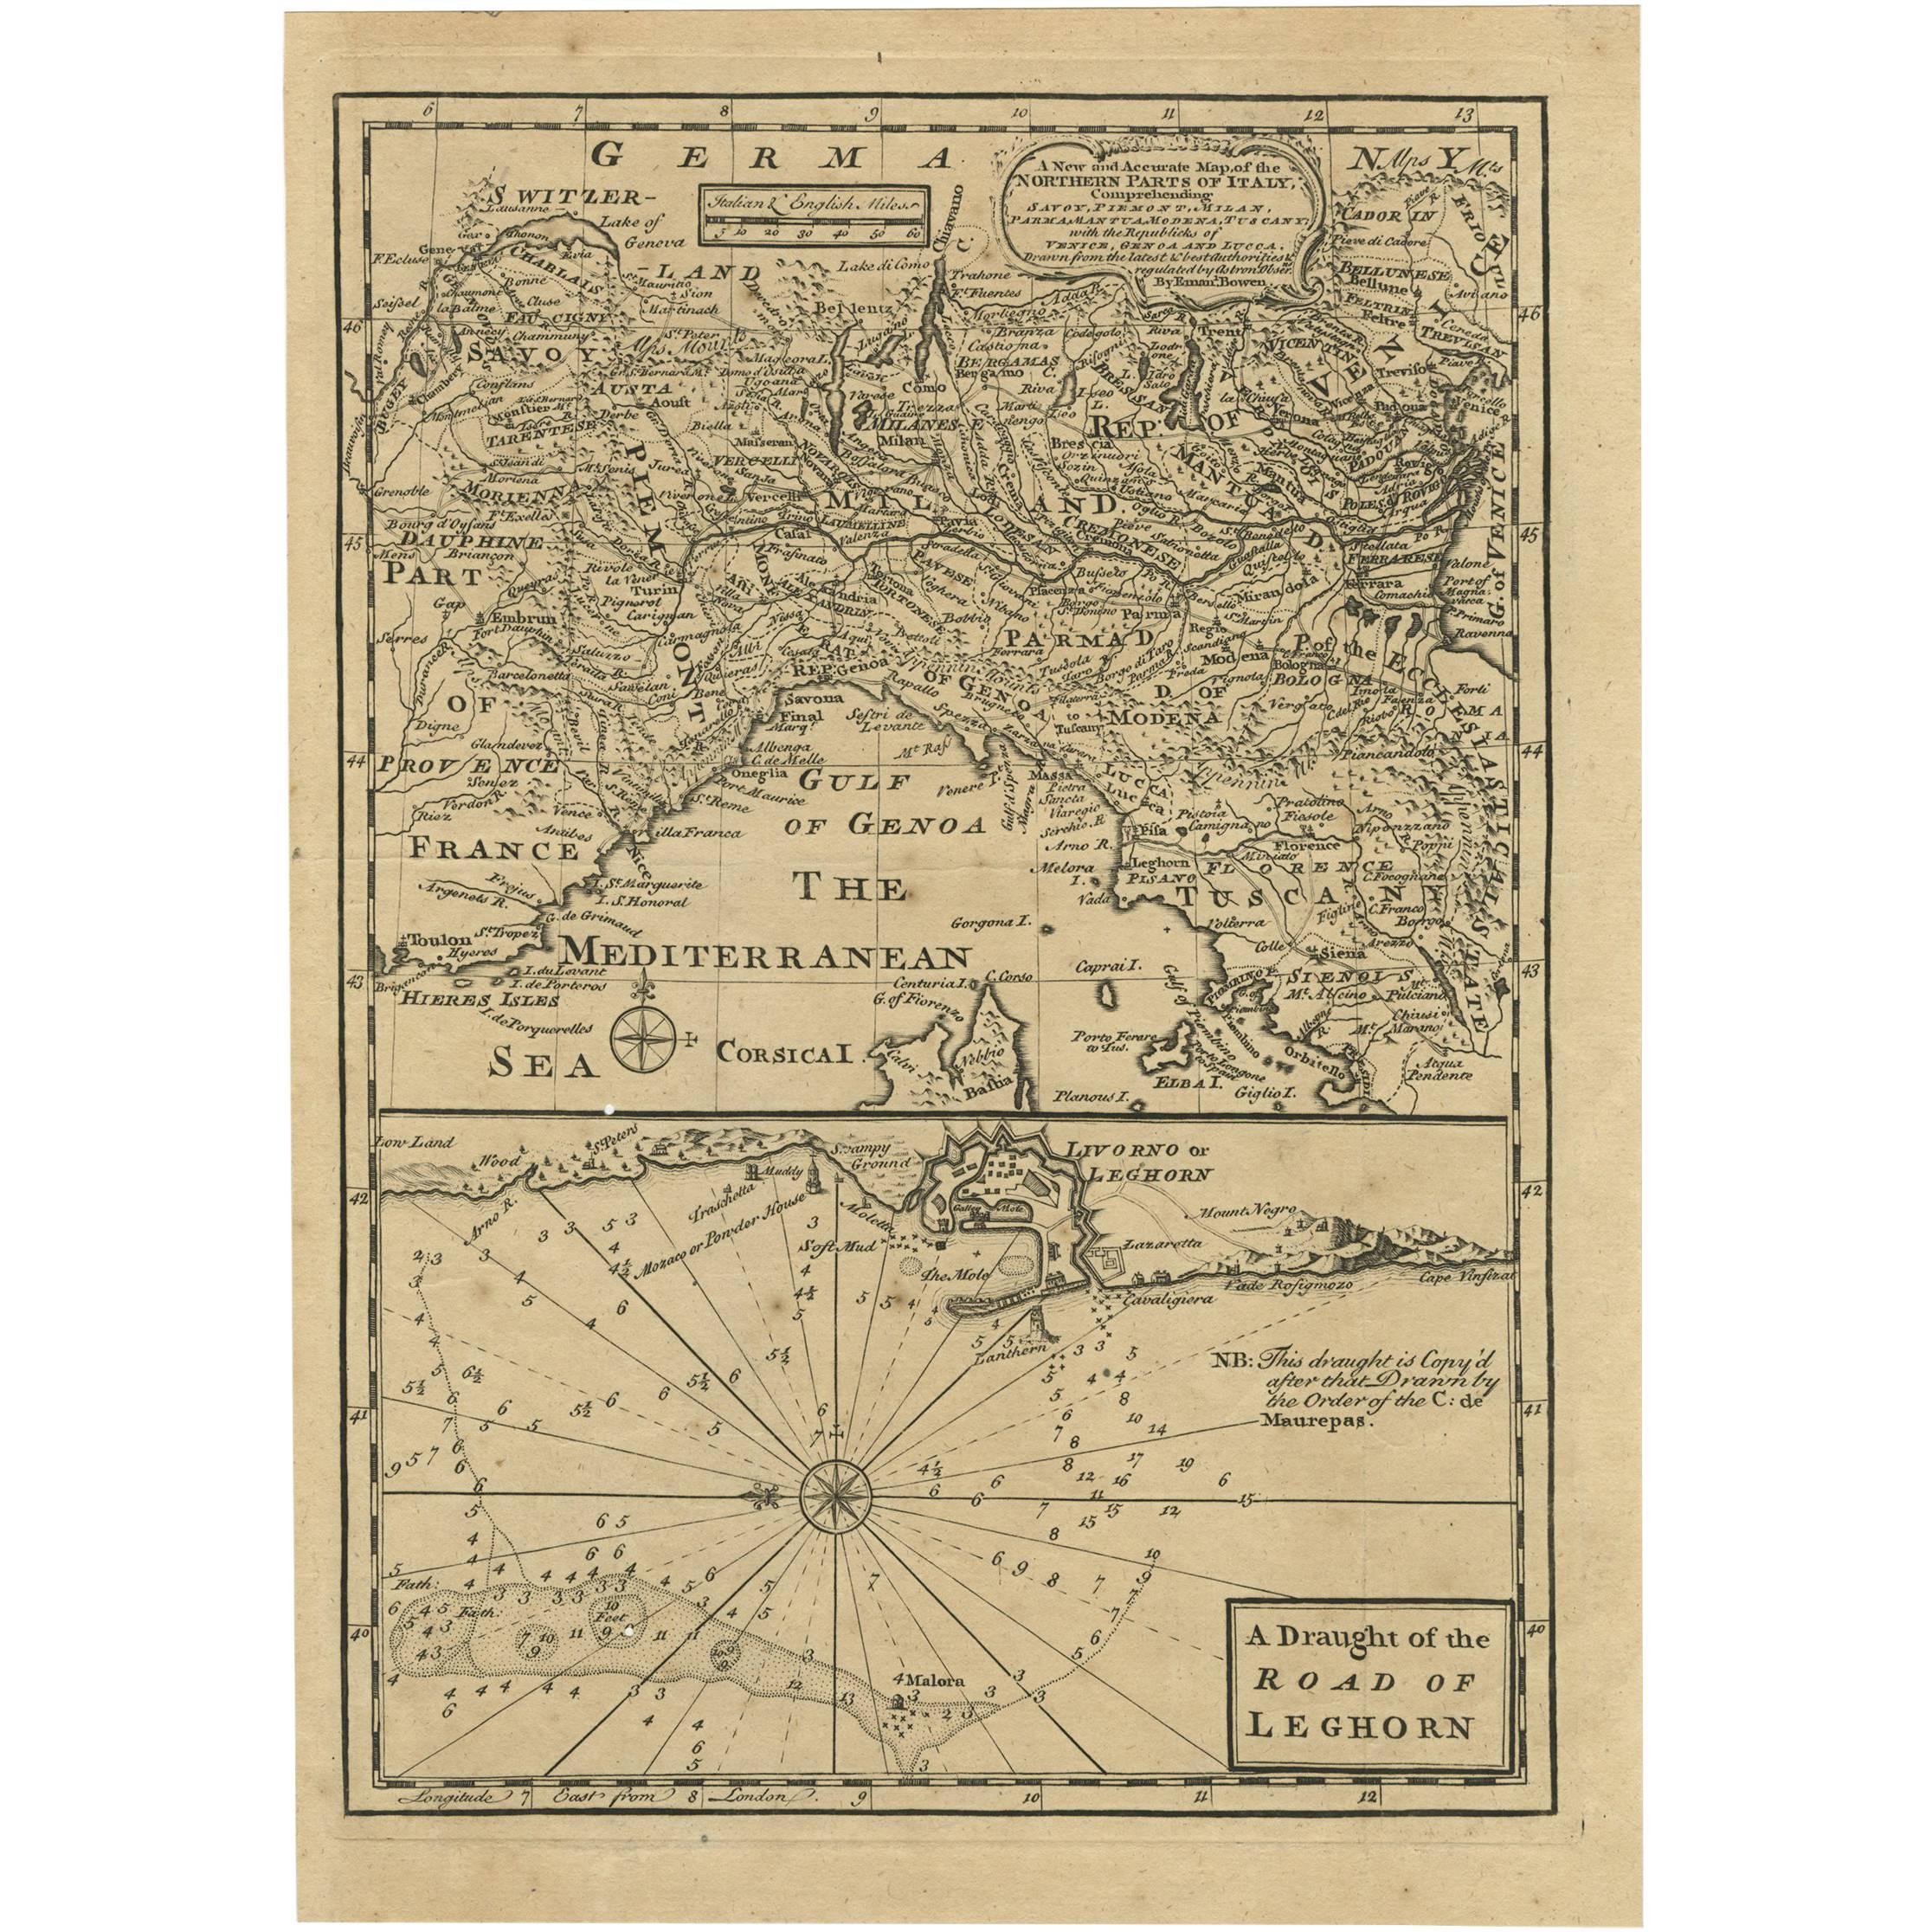 Antique Map of Northern Italy and Livorno by E. Bowen, 1747